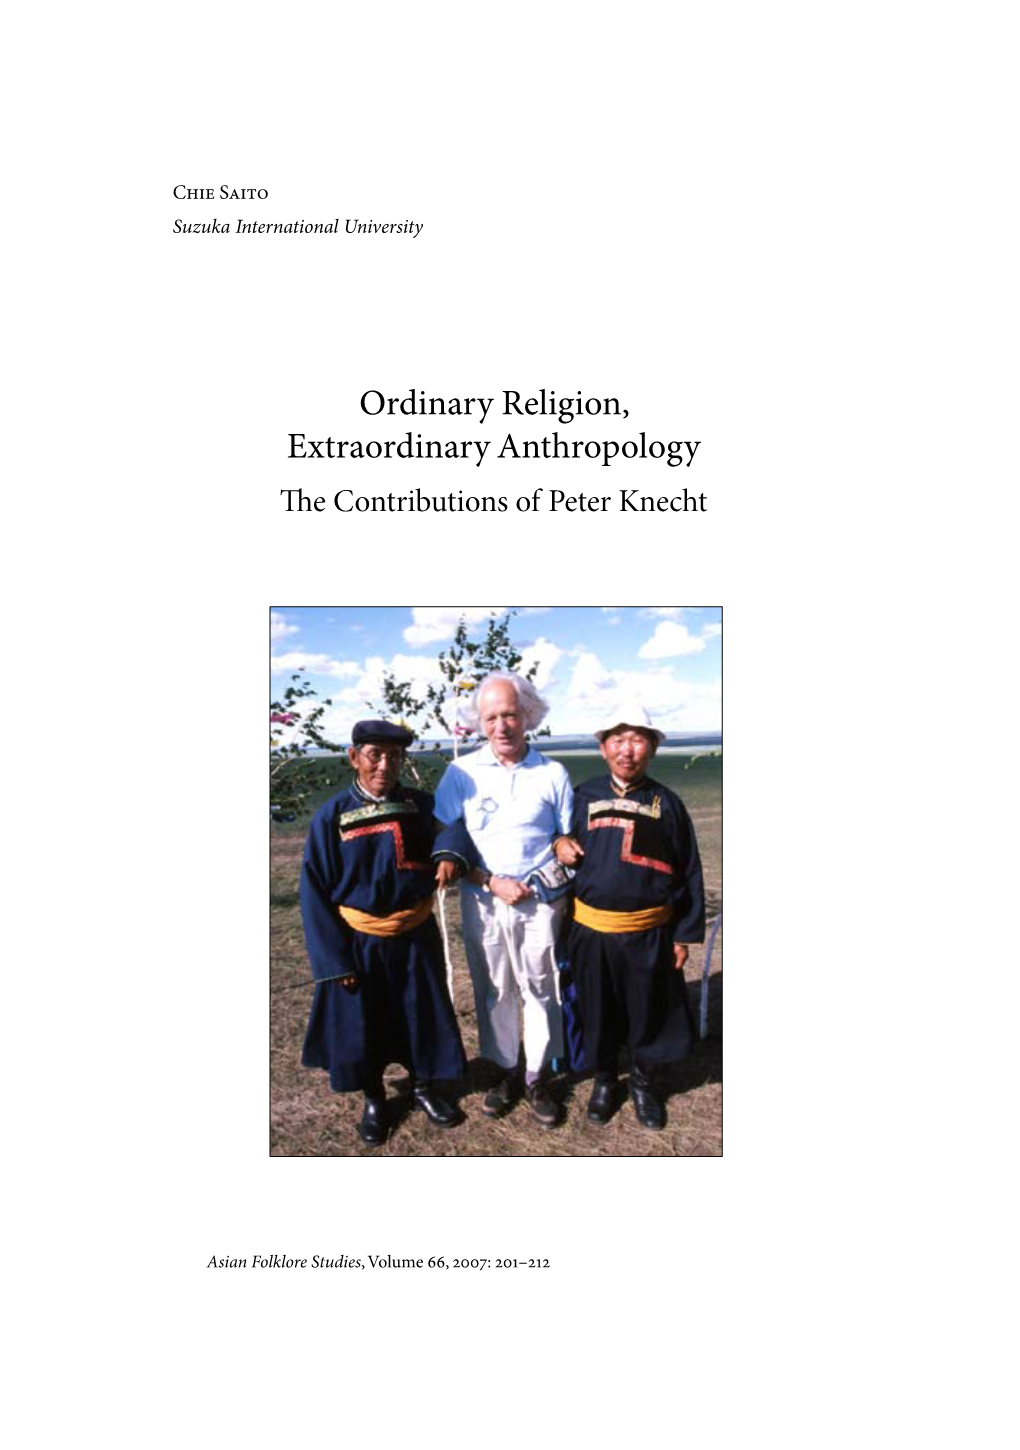 Ordinary Religion, Extraordinary Anthropology the Contributions of Peter Knecht